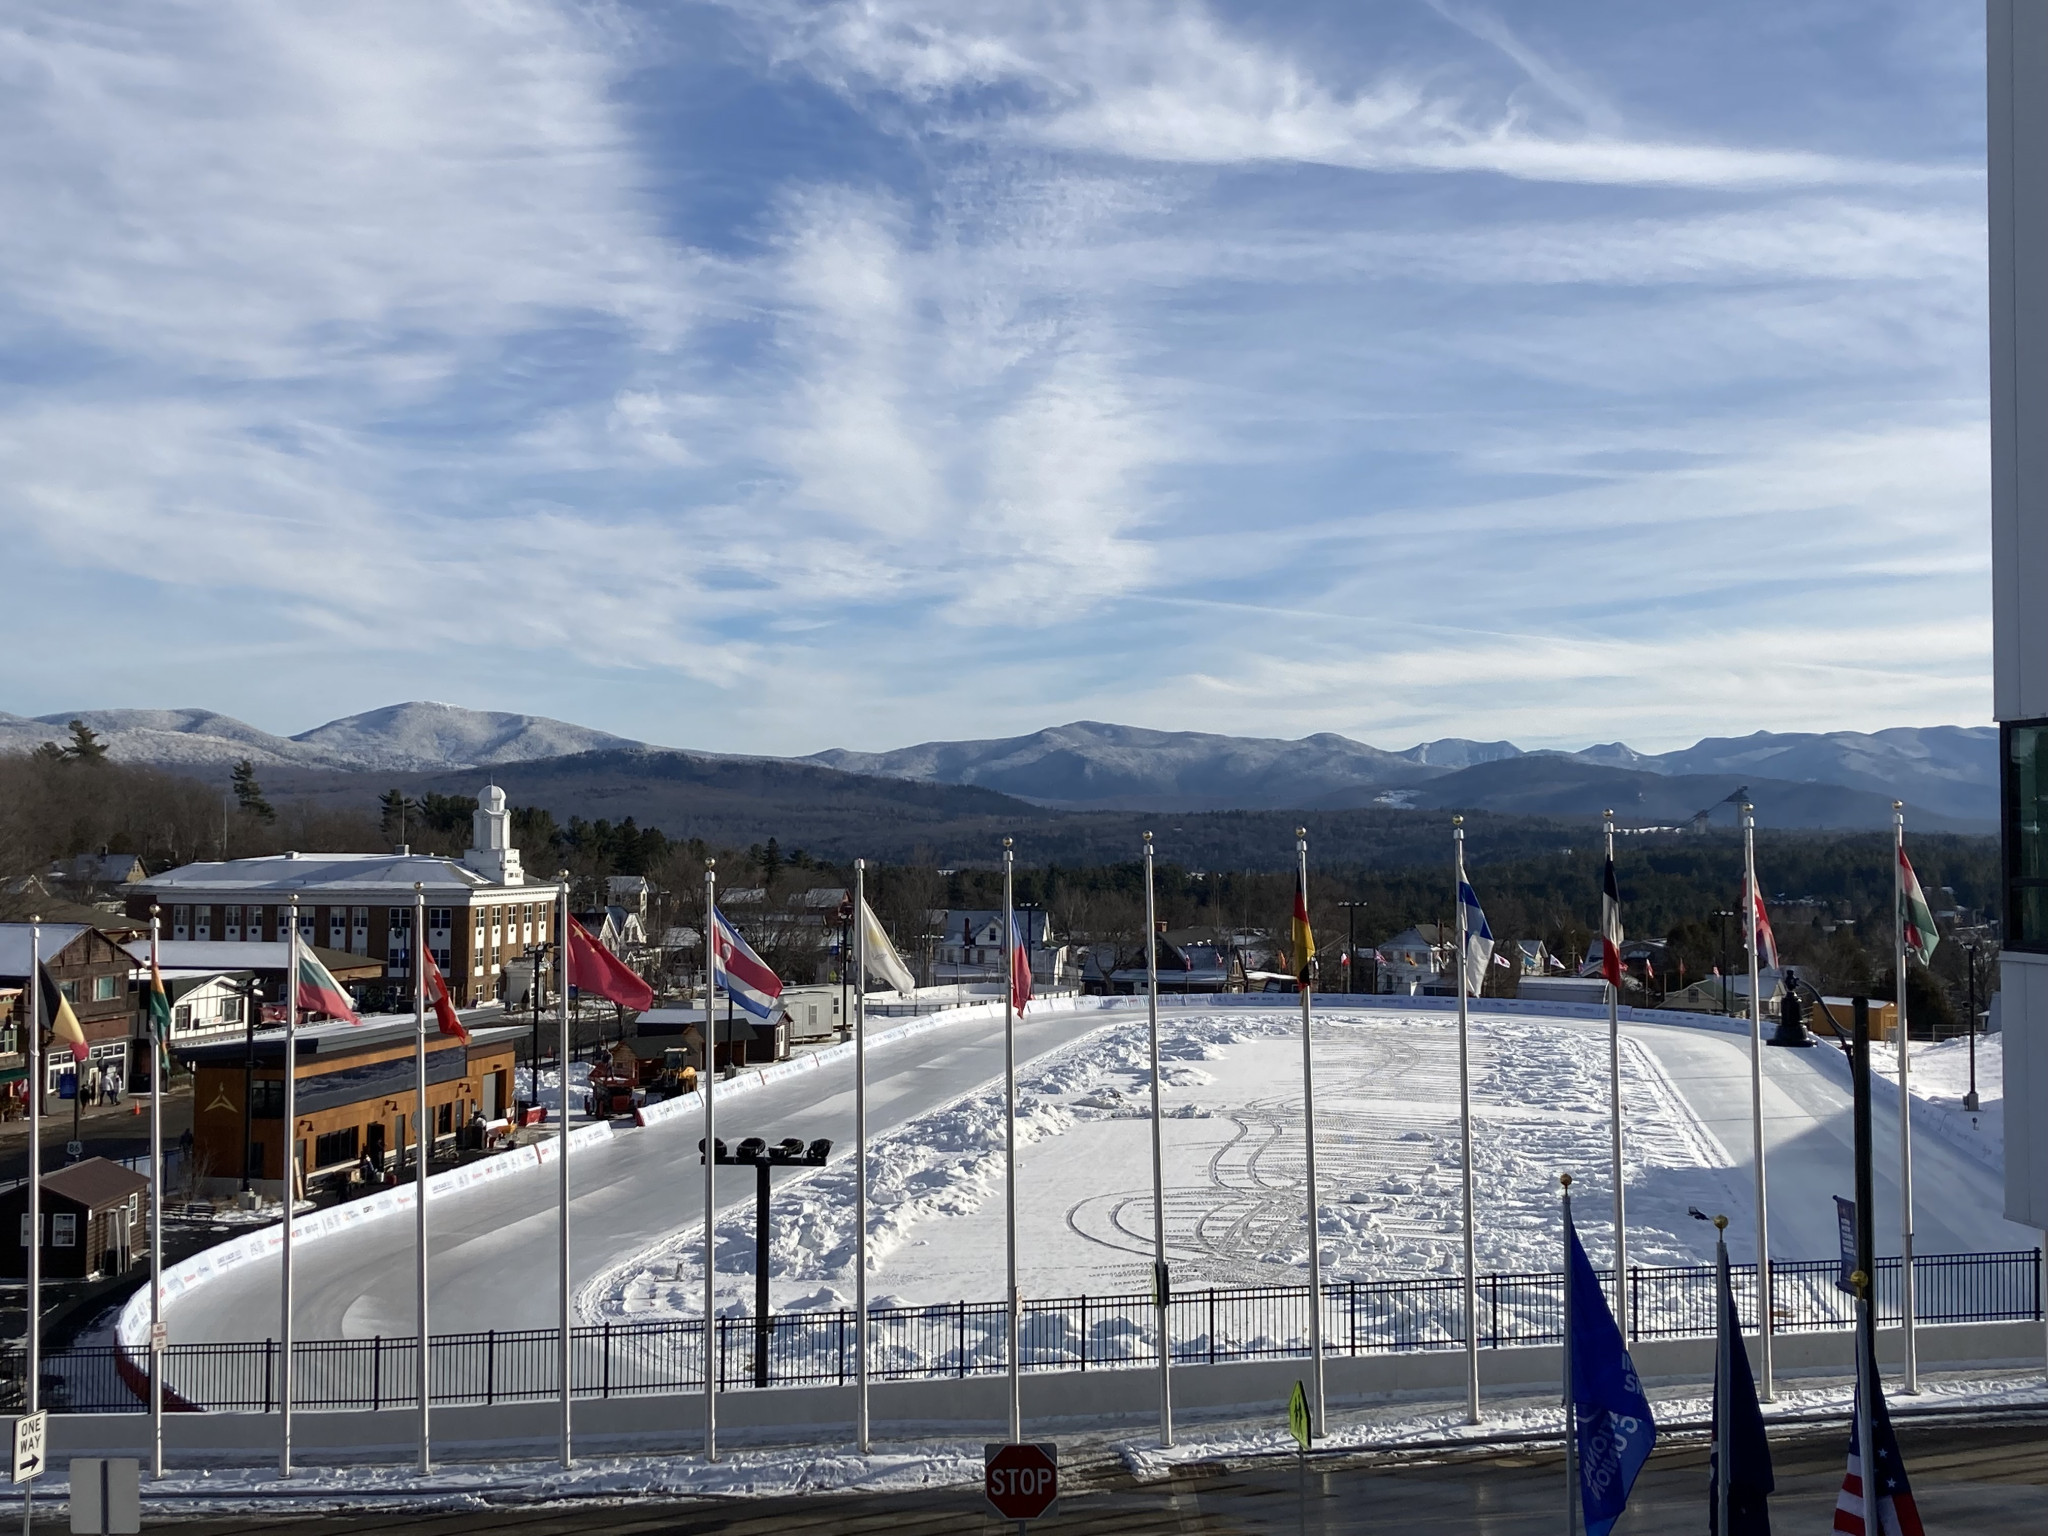 The Adirondack Mountains provide a stunning backdrop to the open-air Olympic Speed Skating Oval ©ITG